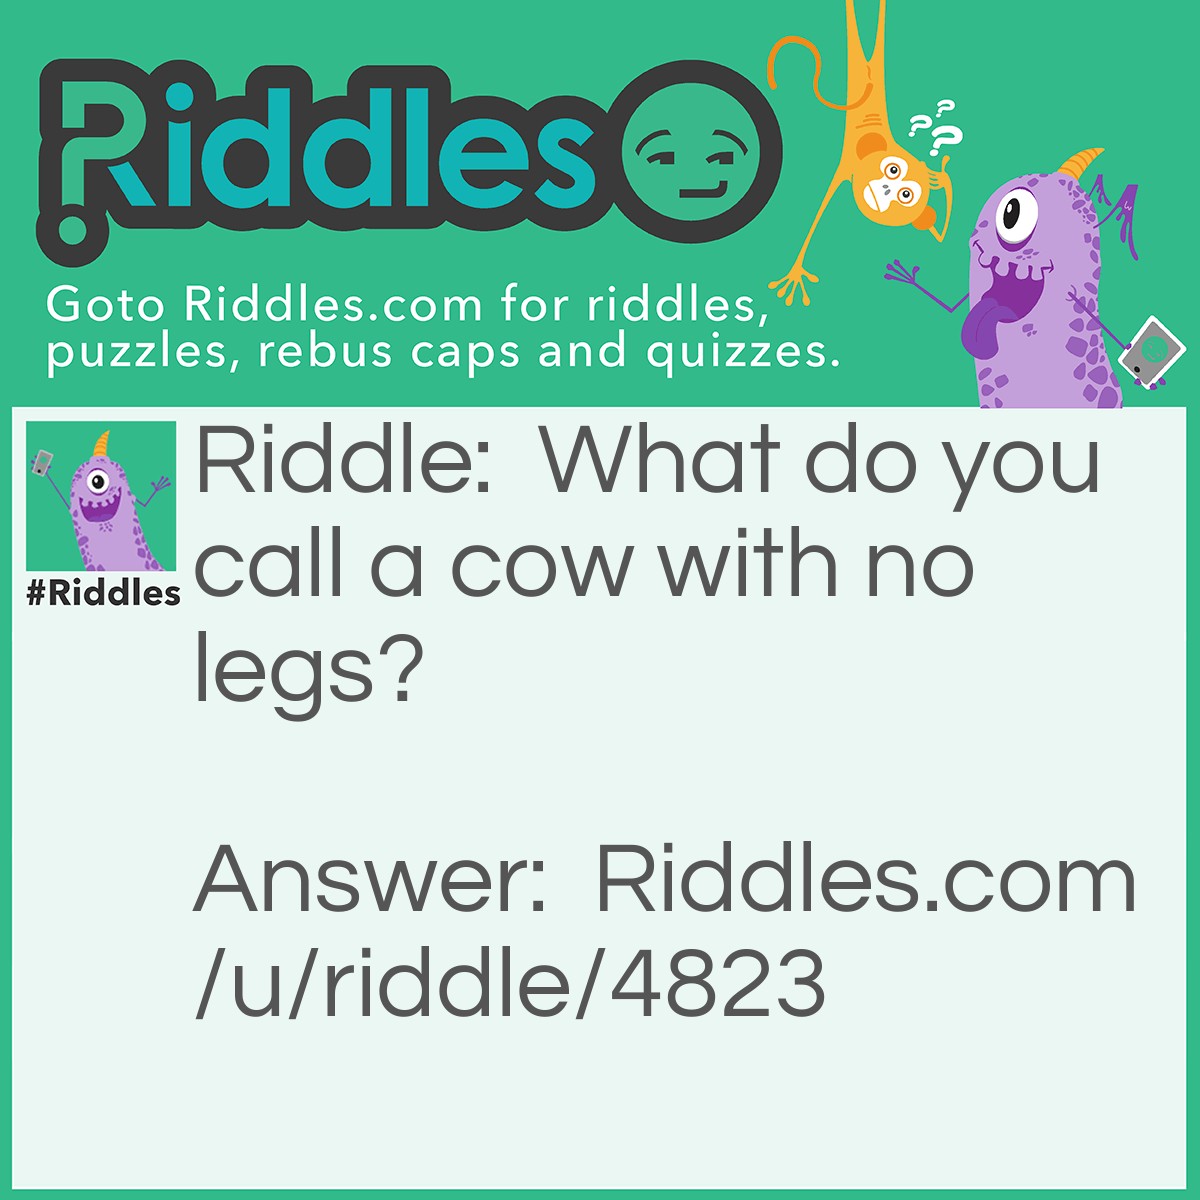 Riddle: What do you call a cow with no legs? Answer: Ground Beef.